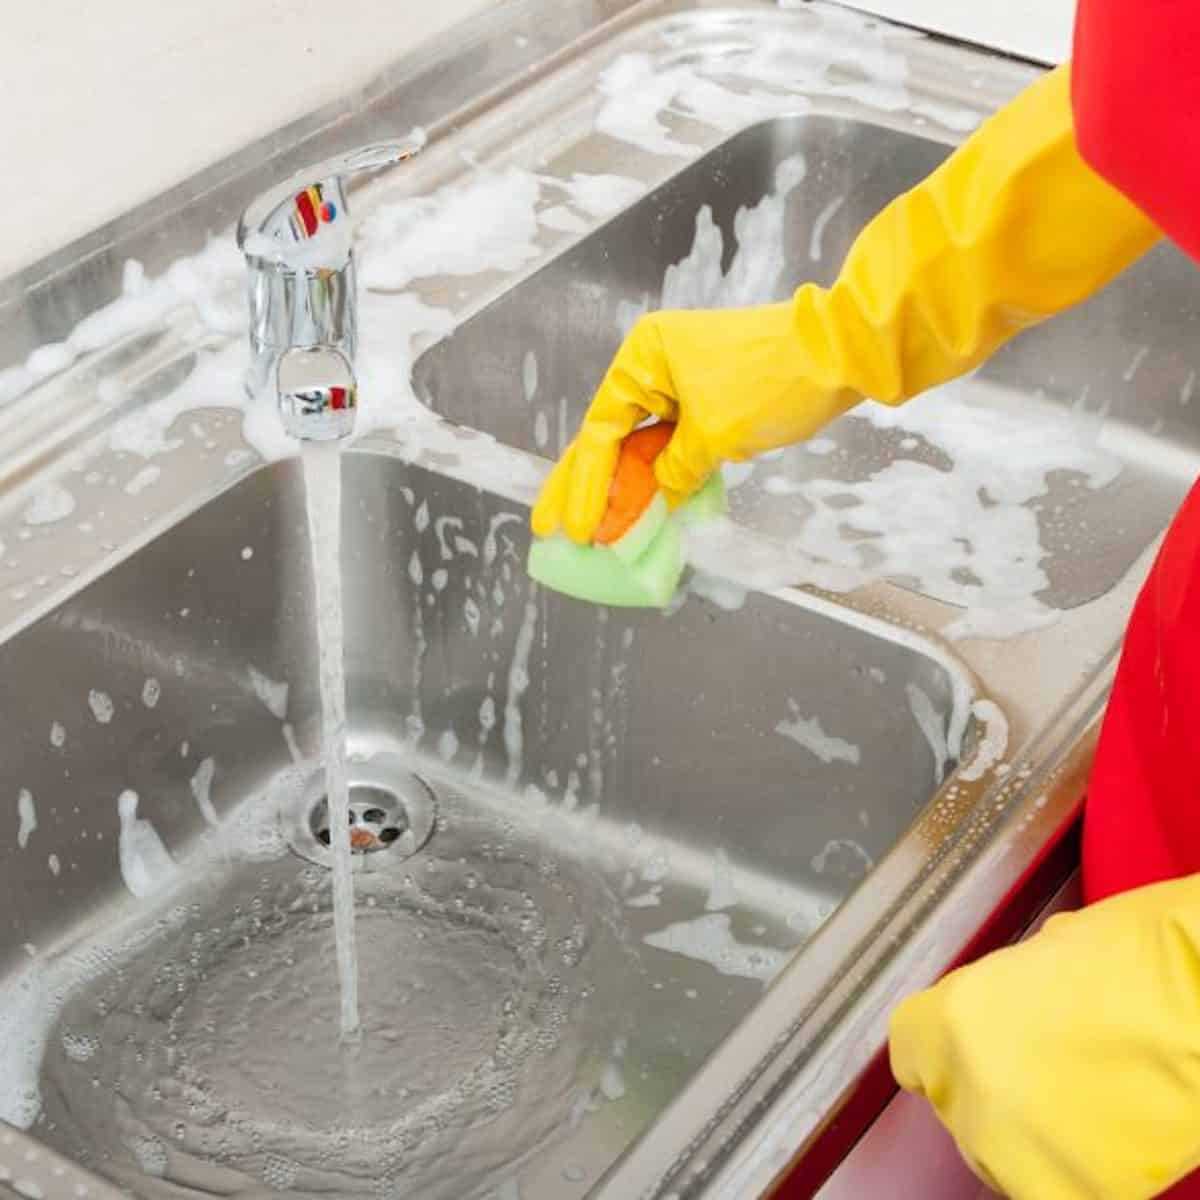 7. Clean the sink accessories